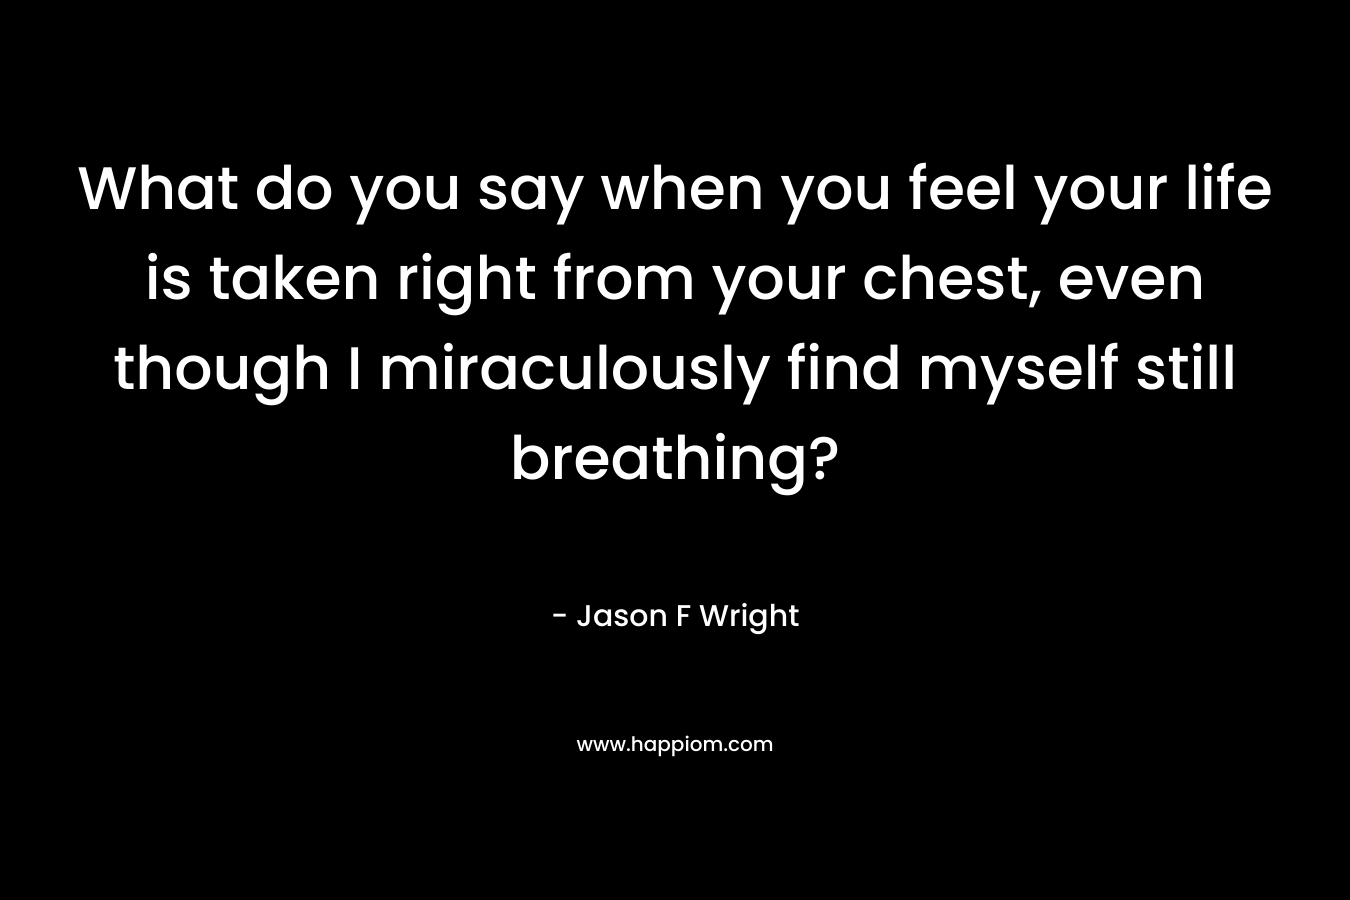 What do you say when you feel your life is taken right from your chest, even though I miraculously find myself still breathing? – Jason F Wright